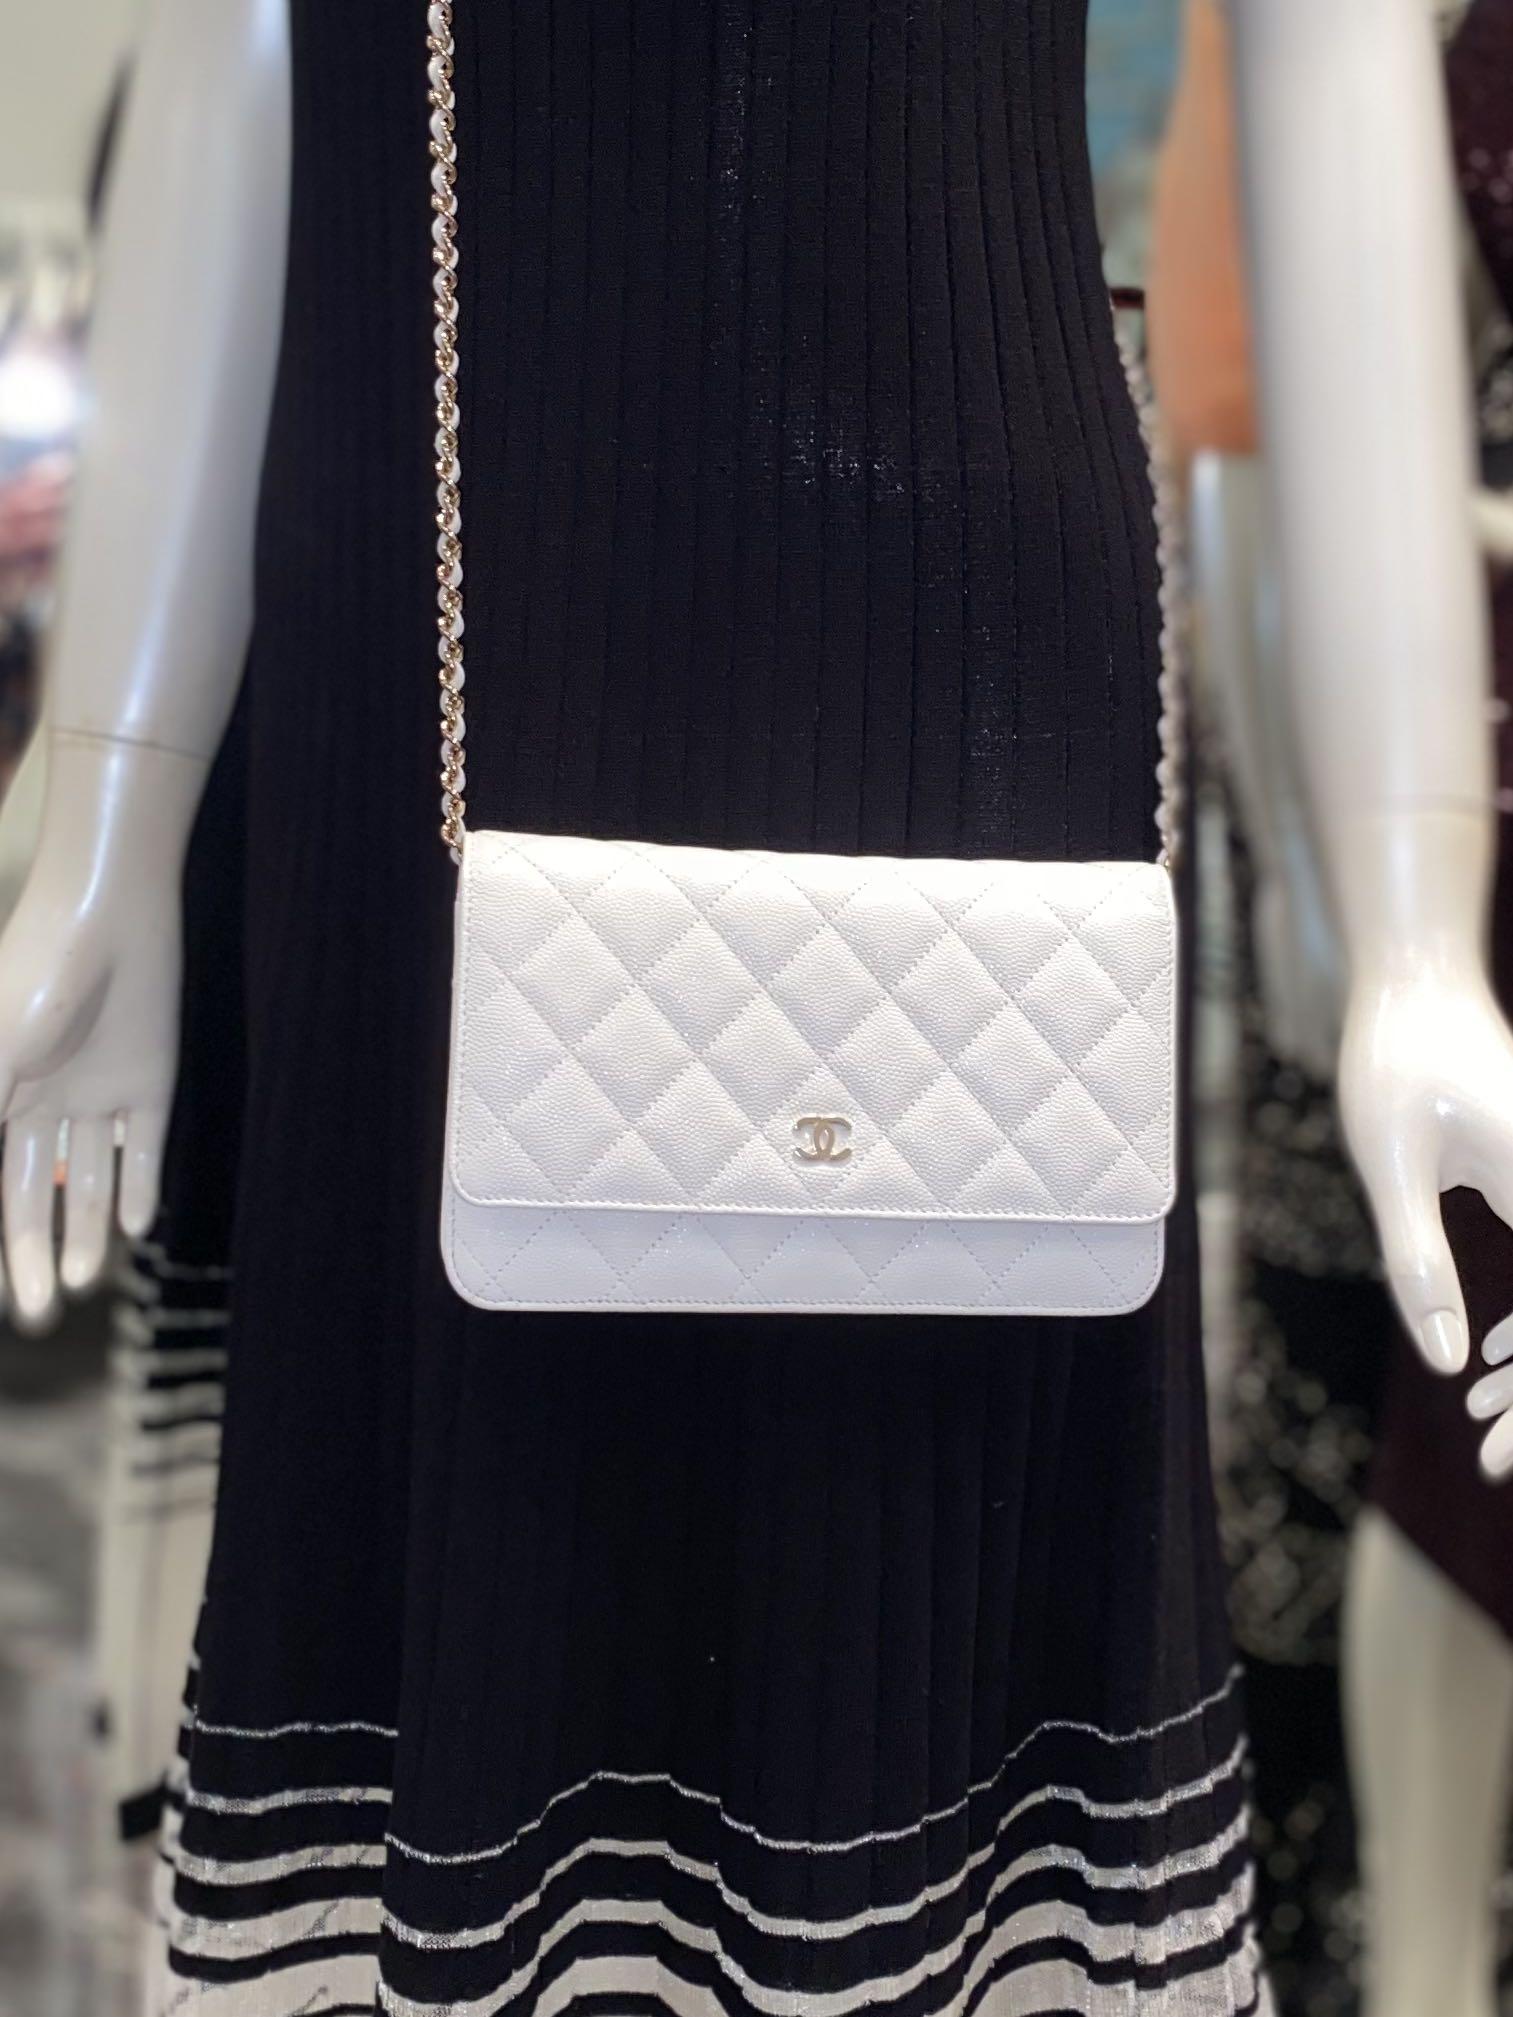 NEW CHANEL WHITE CAVIAR LEATHER WOC WALLET ON CHAIN CLASSIC FLAP MINI BAG  LGHW light gold, Women's Fashion, Bags & Wallets, Cross-body Bags on  Carousell